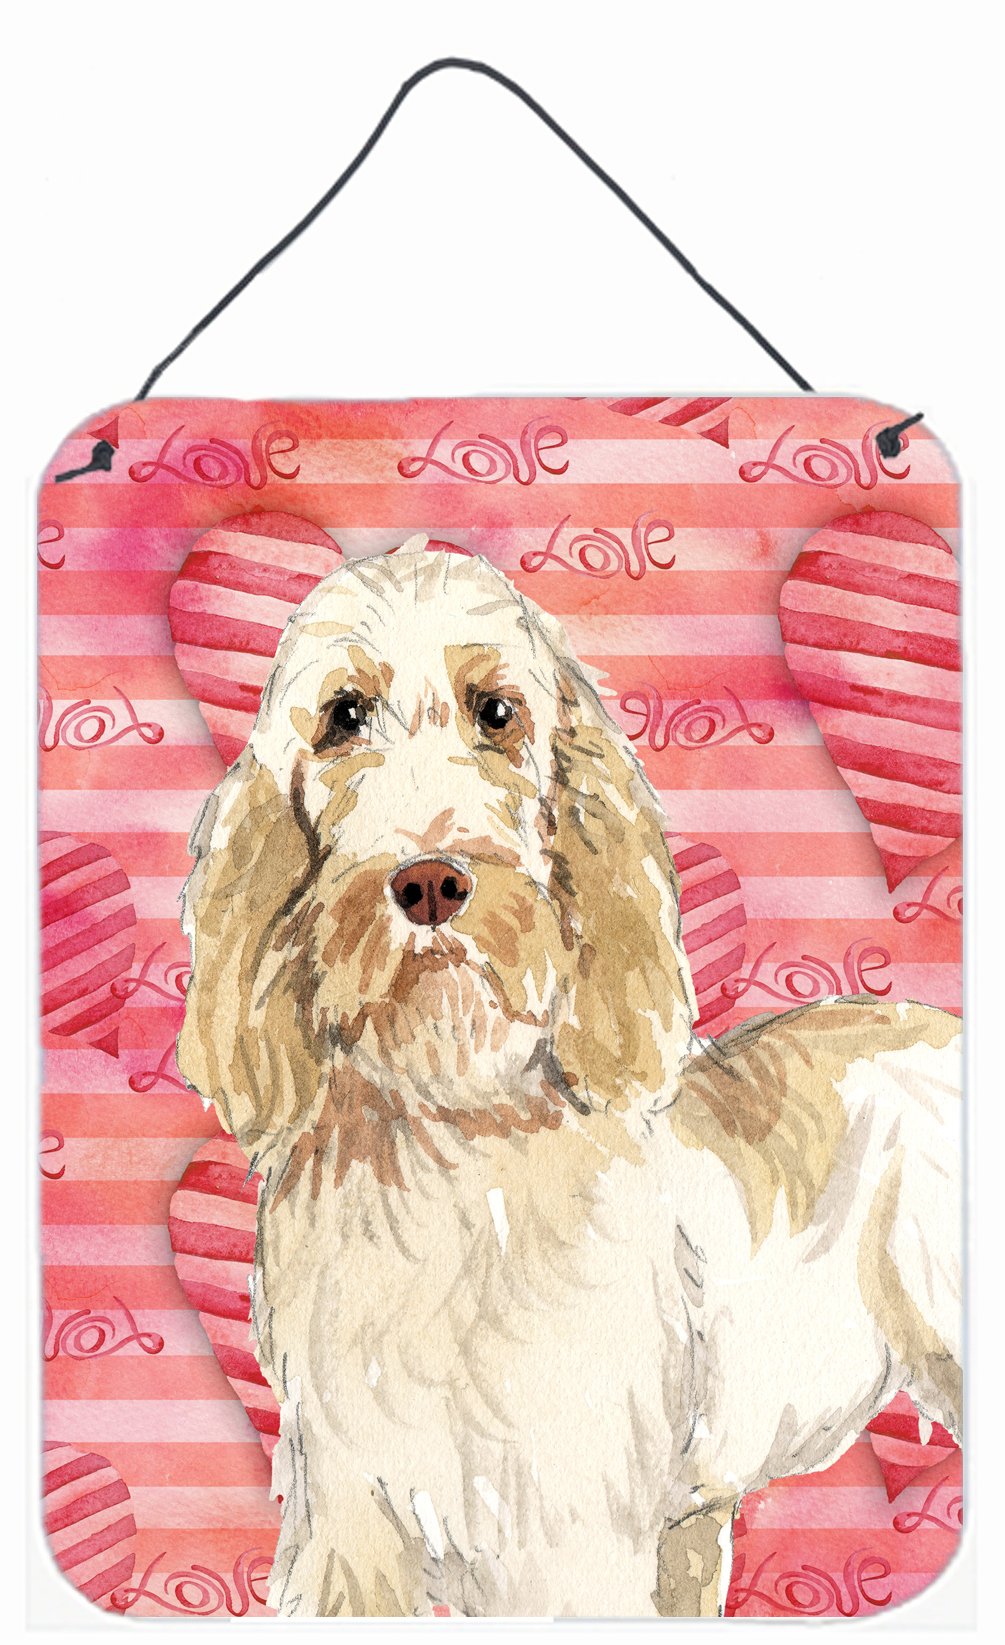 Love a Spinone Italiano Wall or Door Hanging Prints CK1749DS1216 by Caroline's Treasures